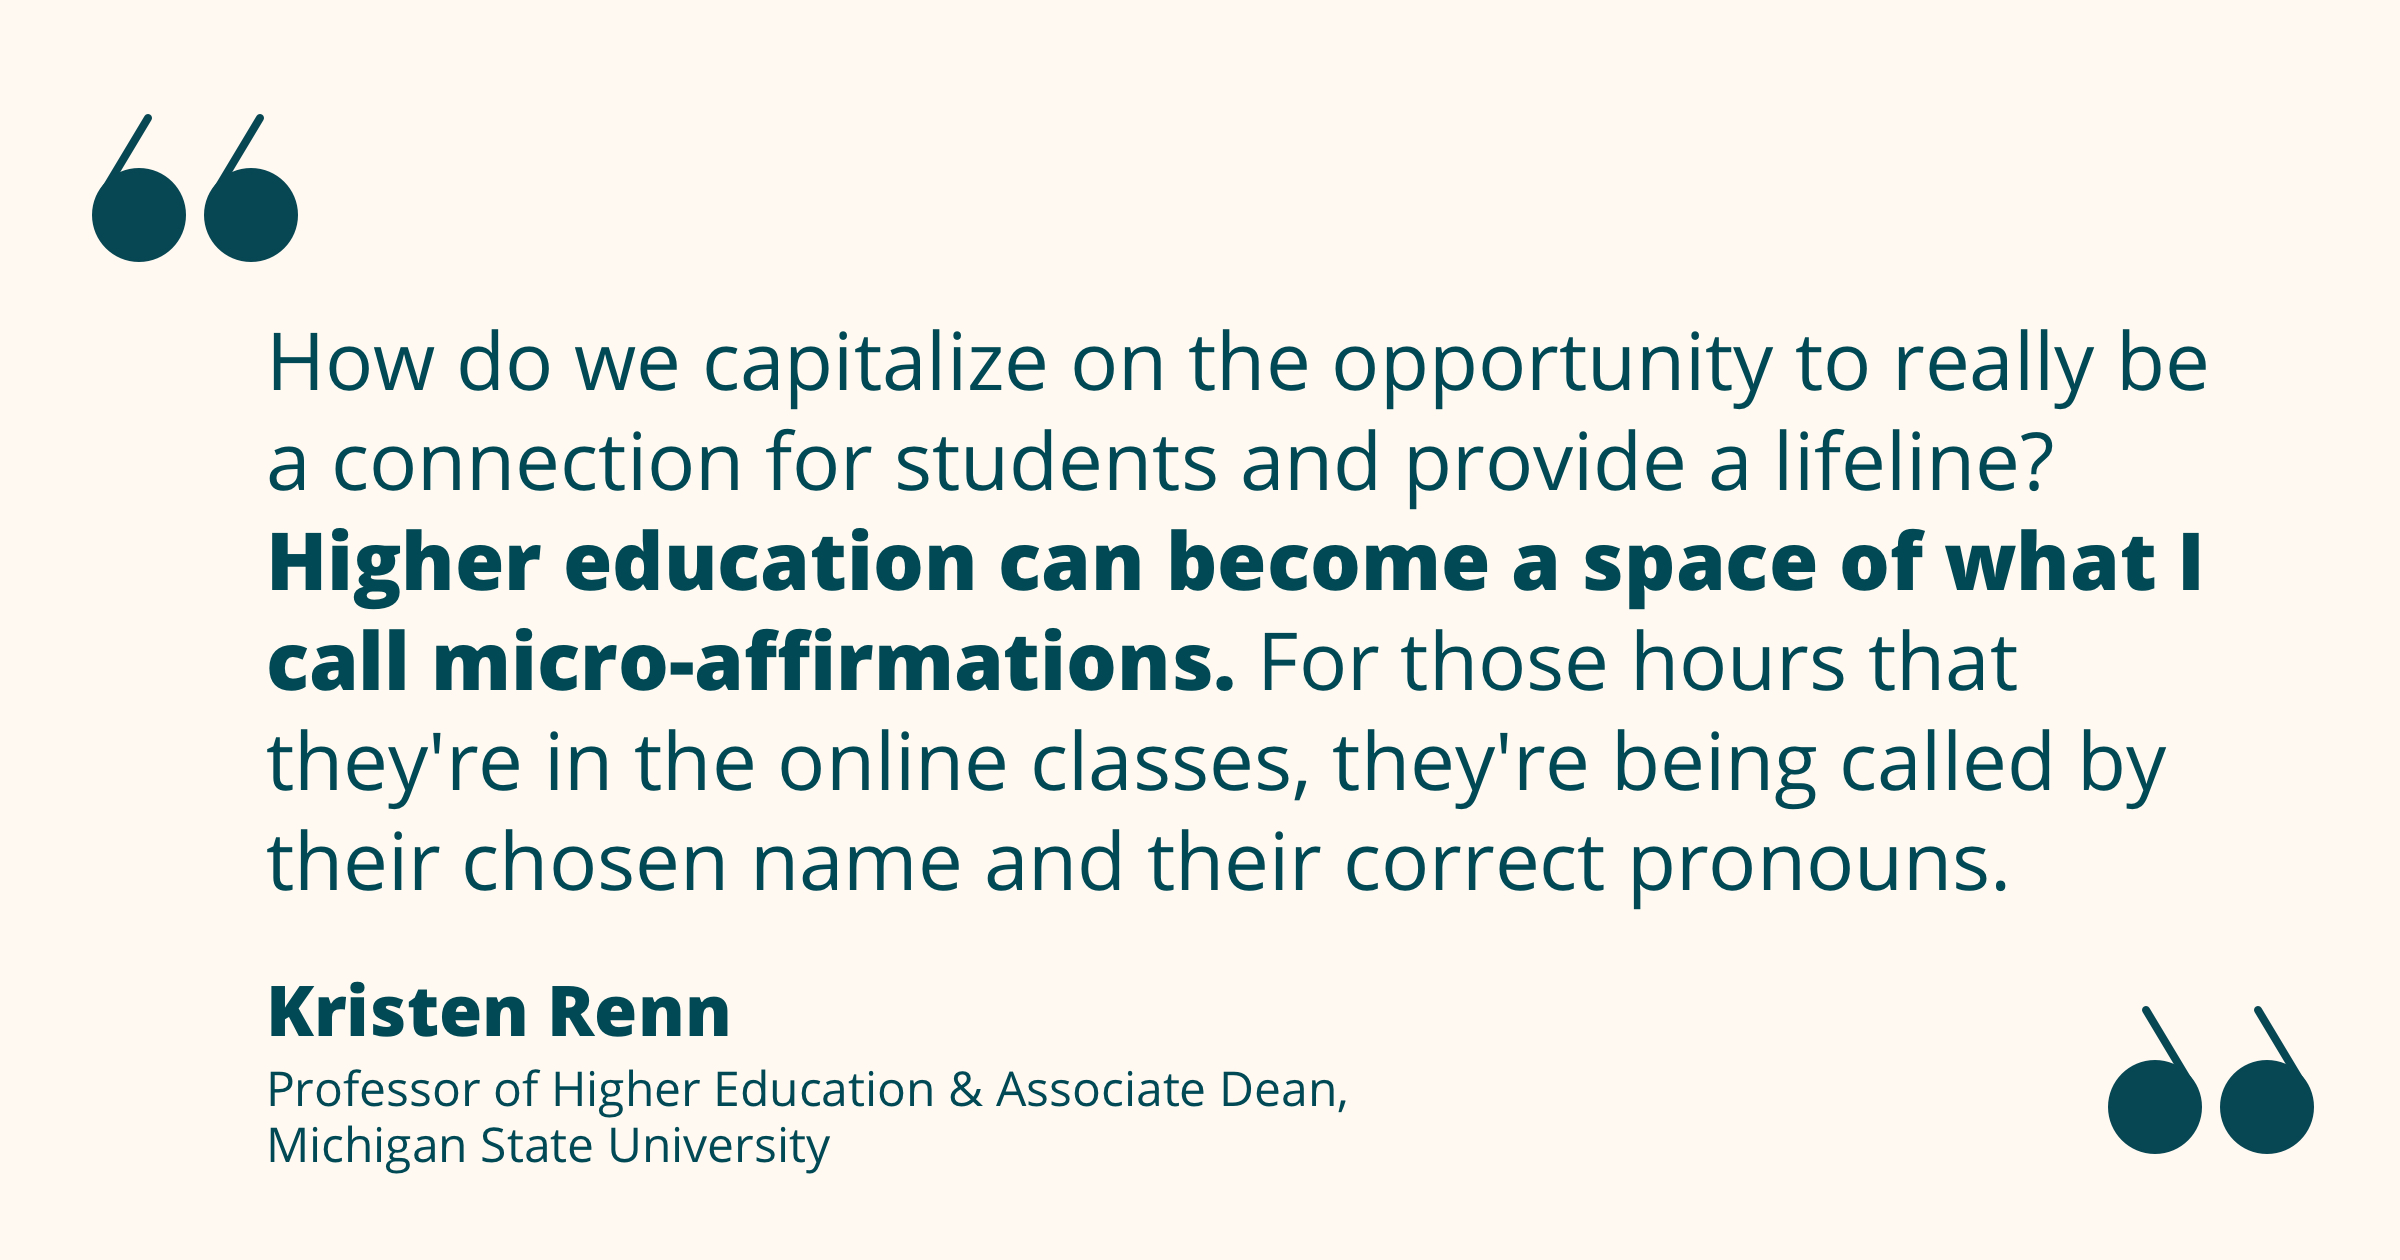 Quote from Kristen Renn re: micro-affirmations in online classes when faculty use students’ chosen name and correct pronouns.